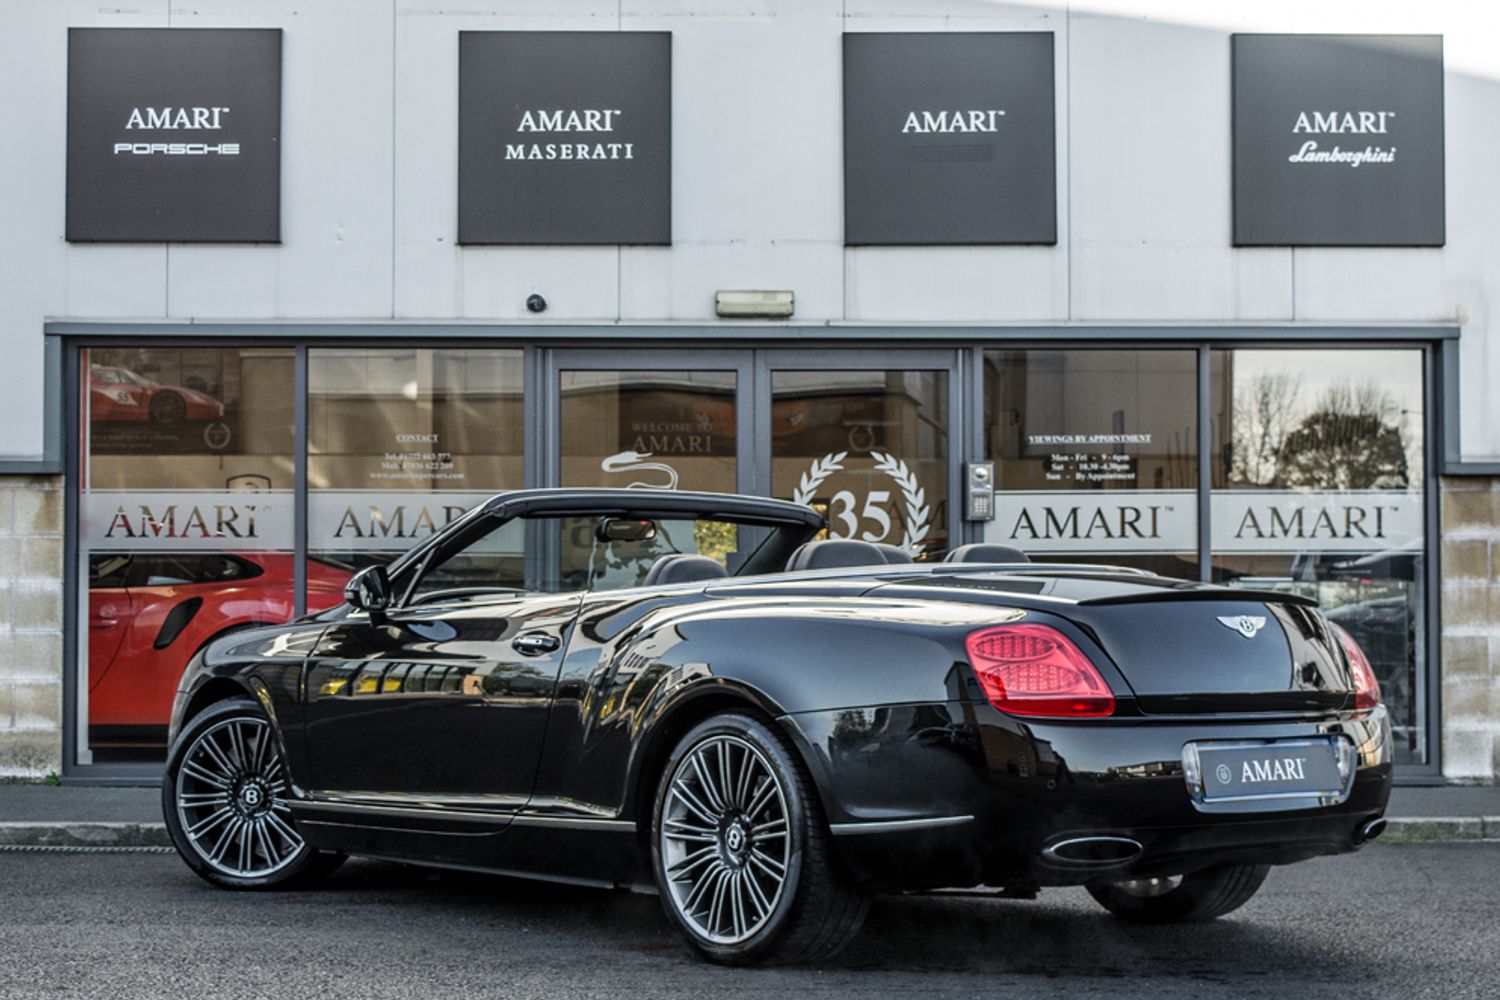 BENTLEY CONTINENTAL CONVERTIBLE 6.0 GTC SPEED 2DR AUTOMATIC